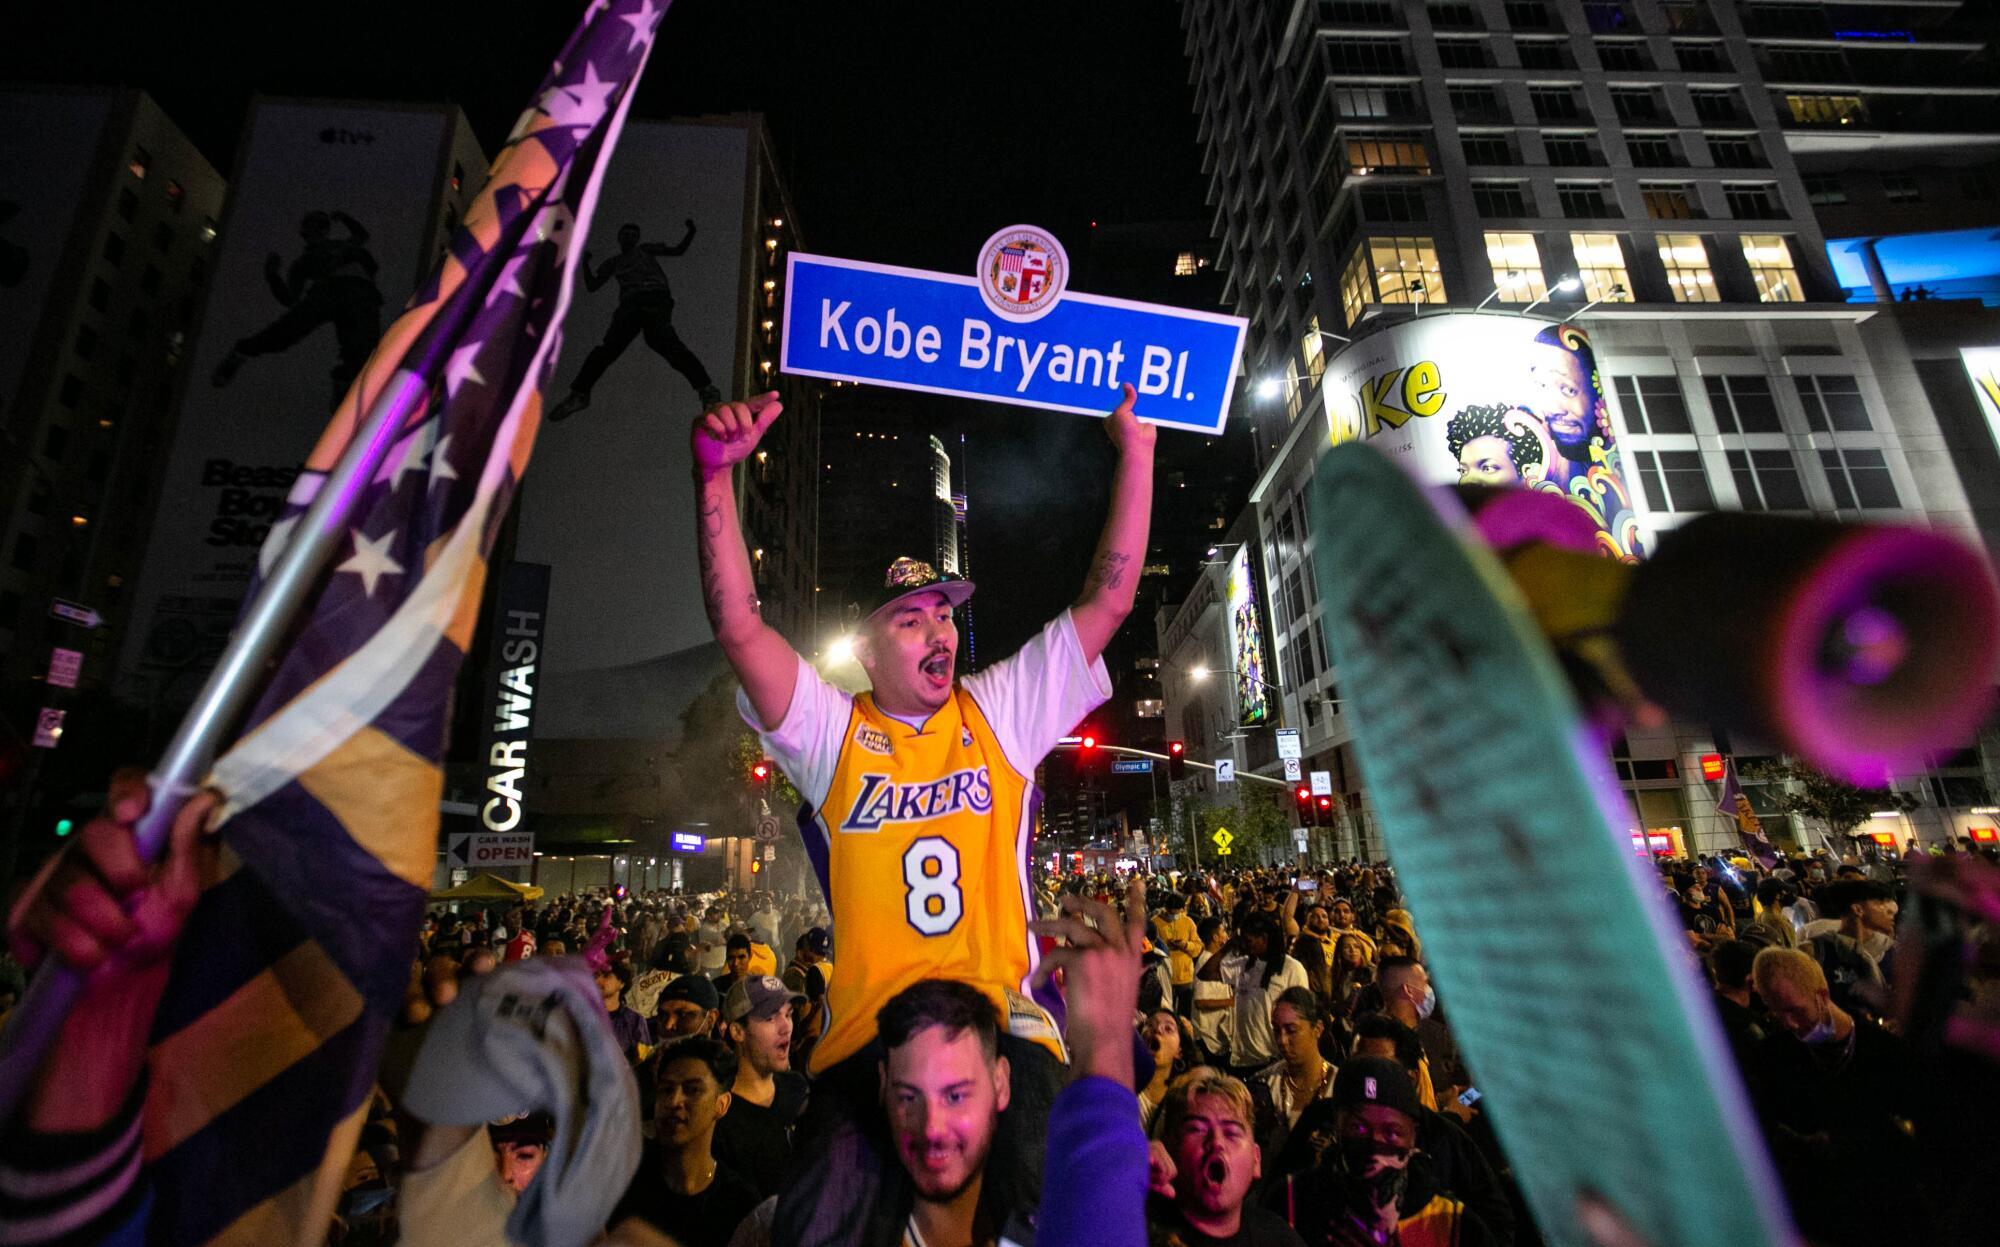 A man holds up a Kobe Bryant Boulevard sign as fans celebrate after the Lakers' win over the Miami Heat in the NBA Finals.